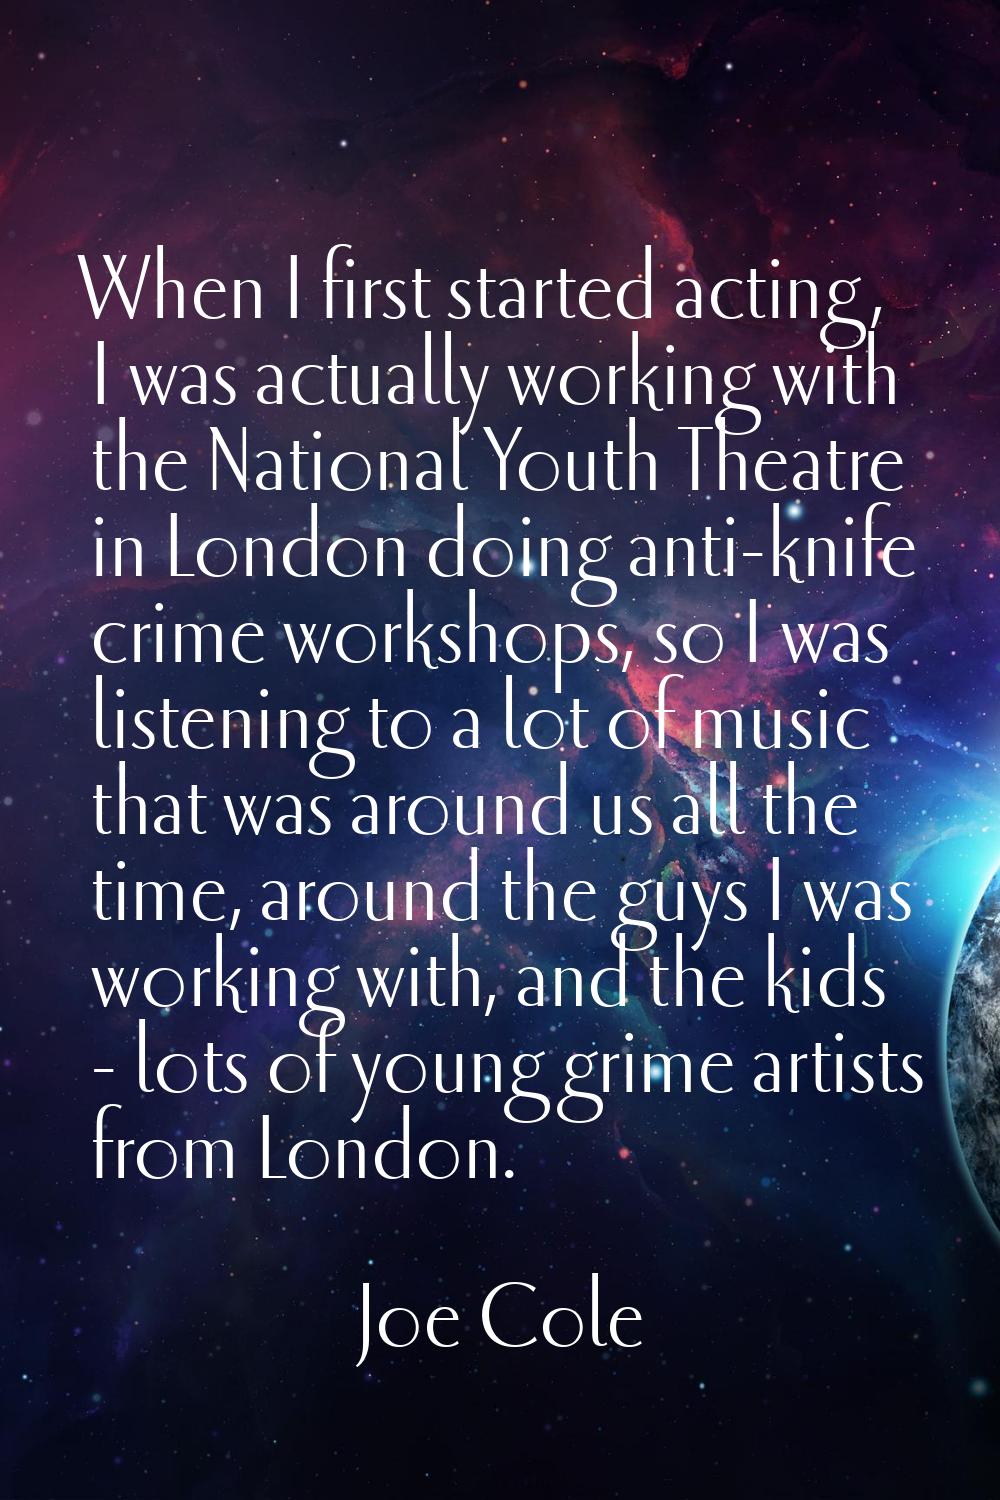 When I first started acting, I was actually working with the National Youth Theatre in London doing